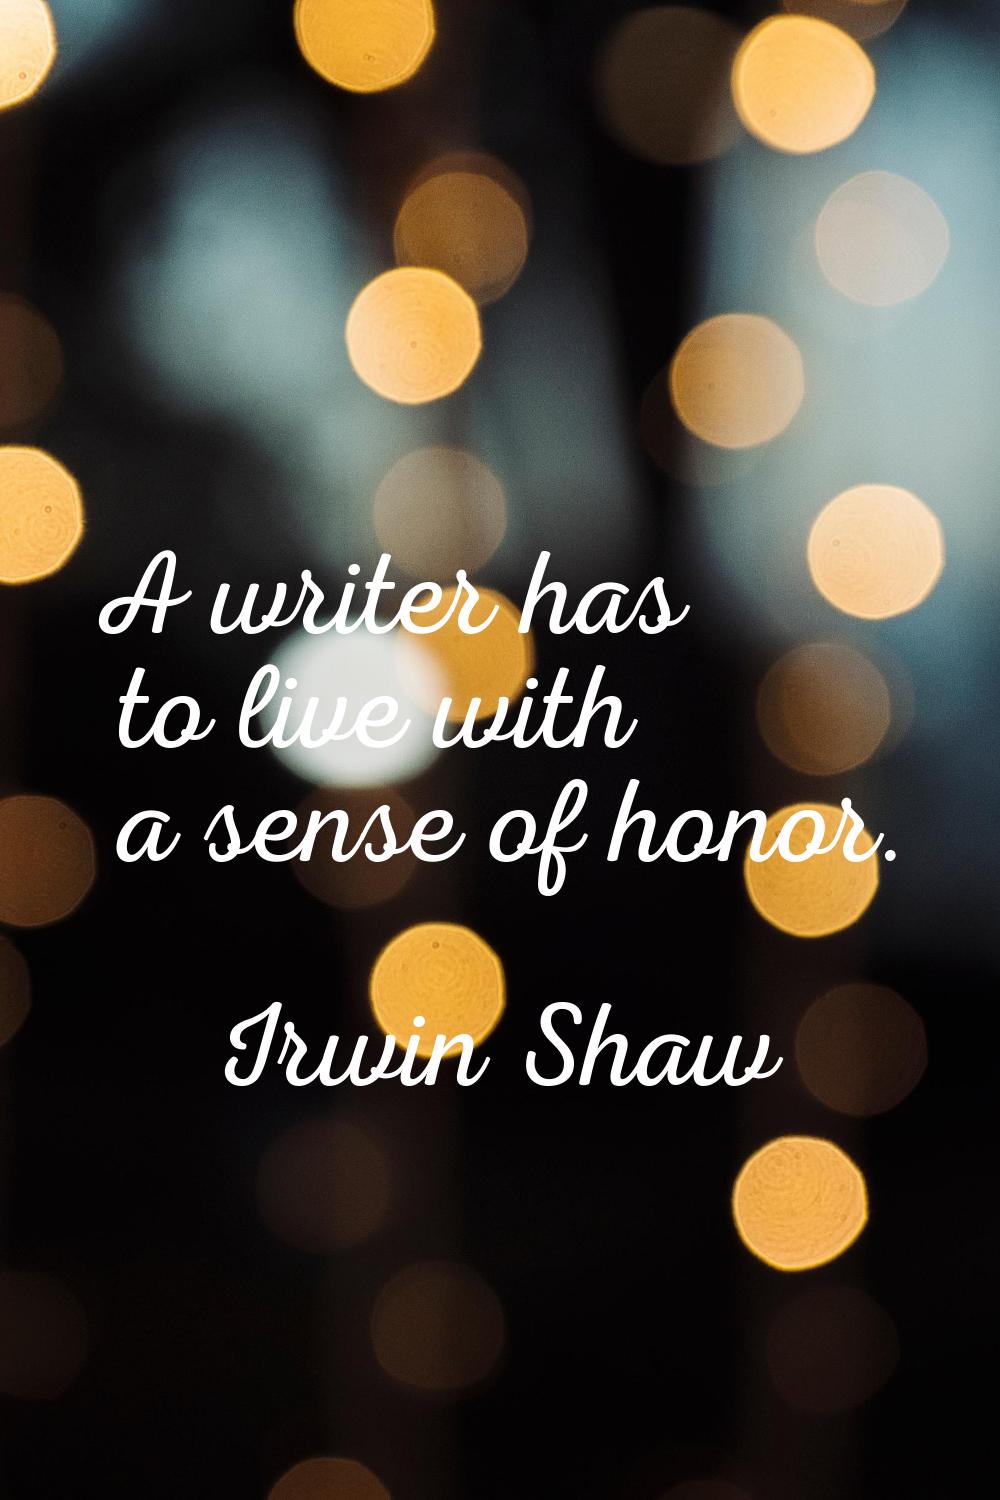 A writer has to live with a sense of honor.